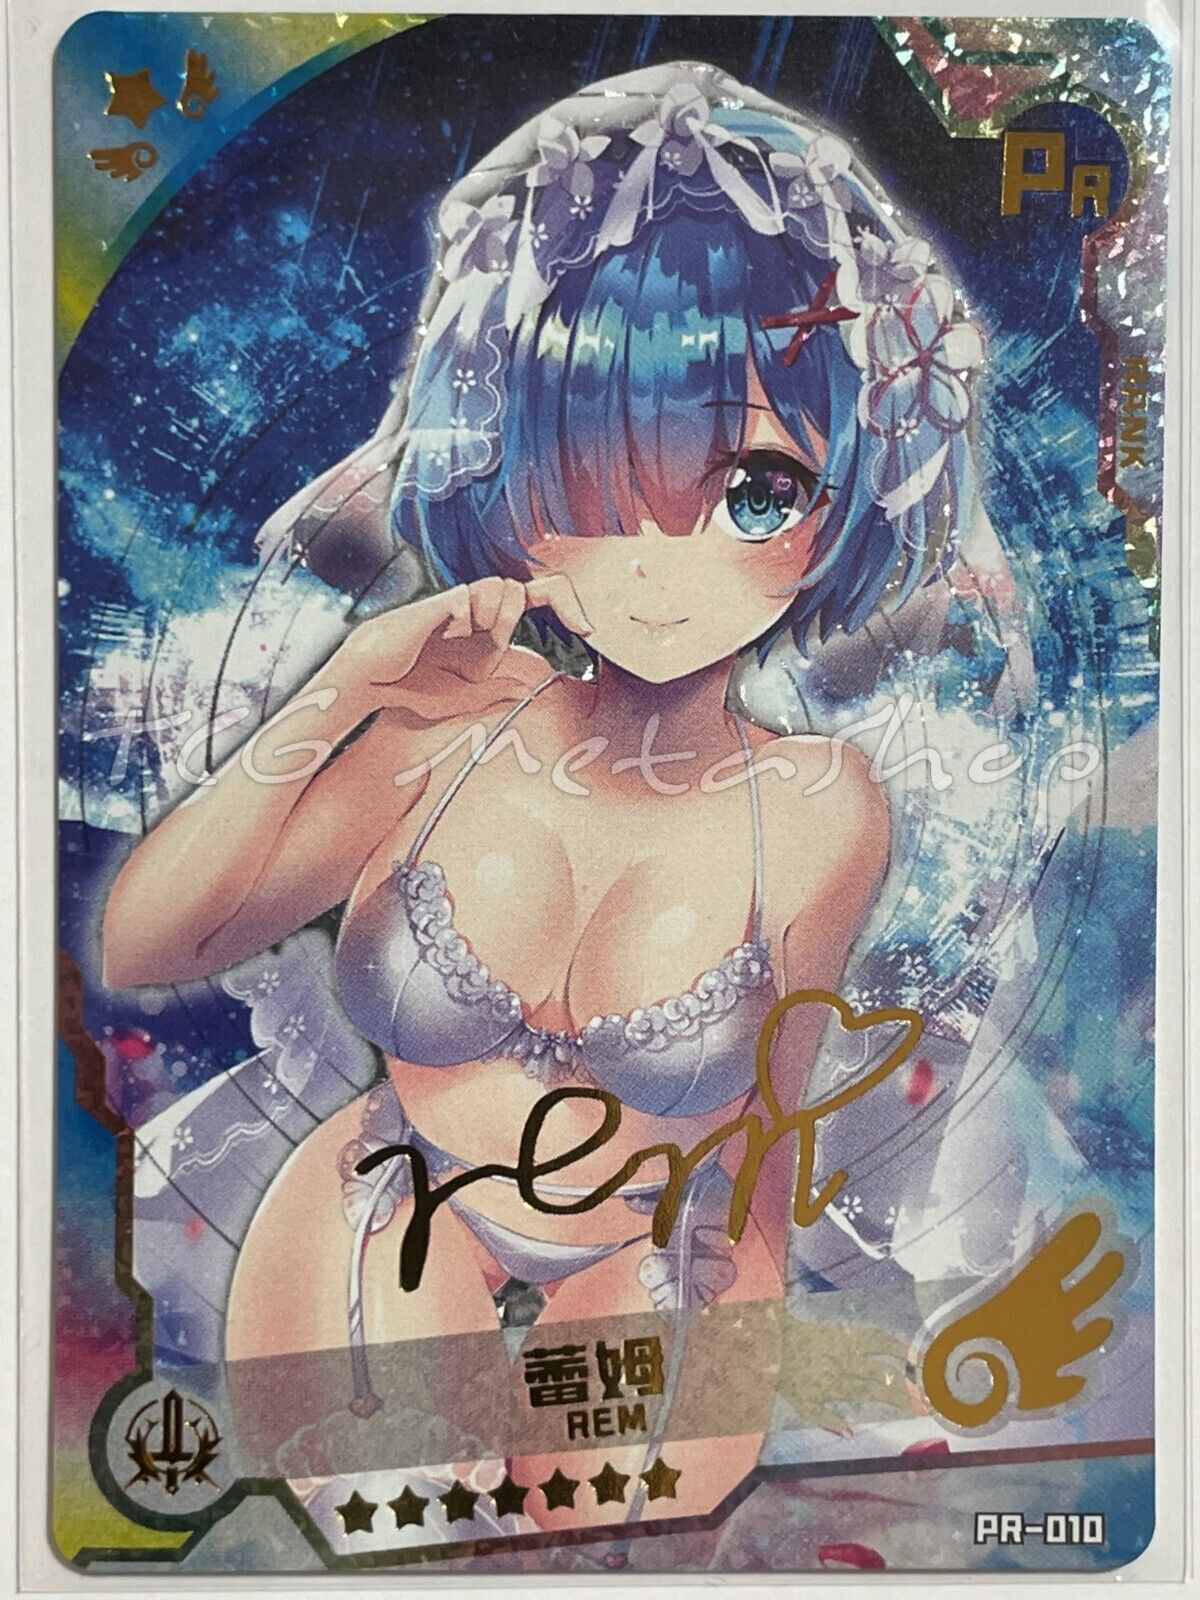 🔥 Maiden / Girl Party - Goddess Story  (PR) [Pick Your Singles] Anime Cards 🔥